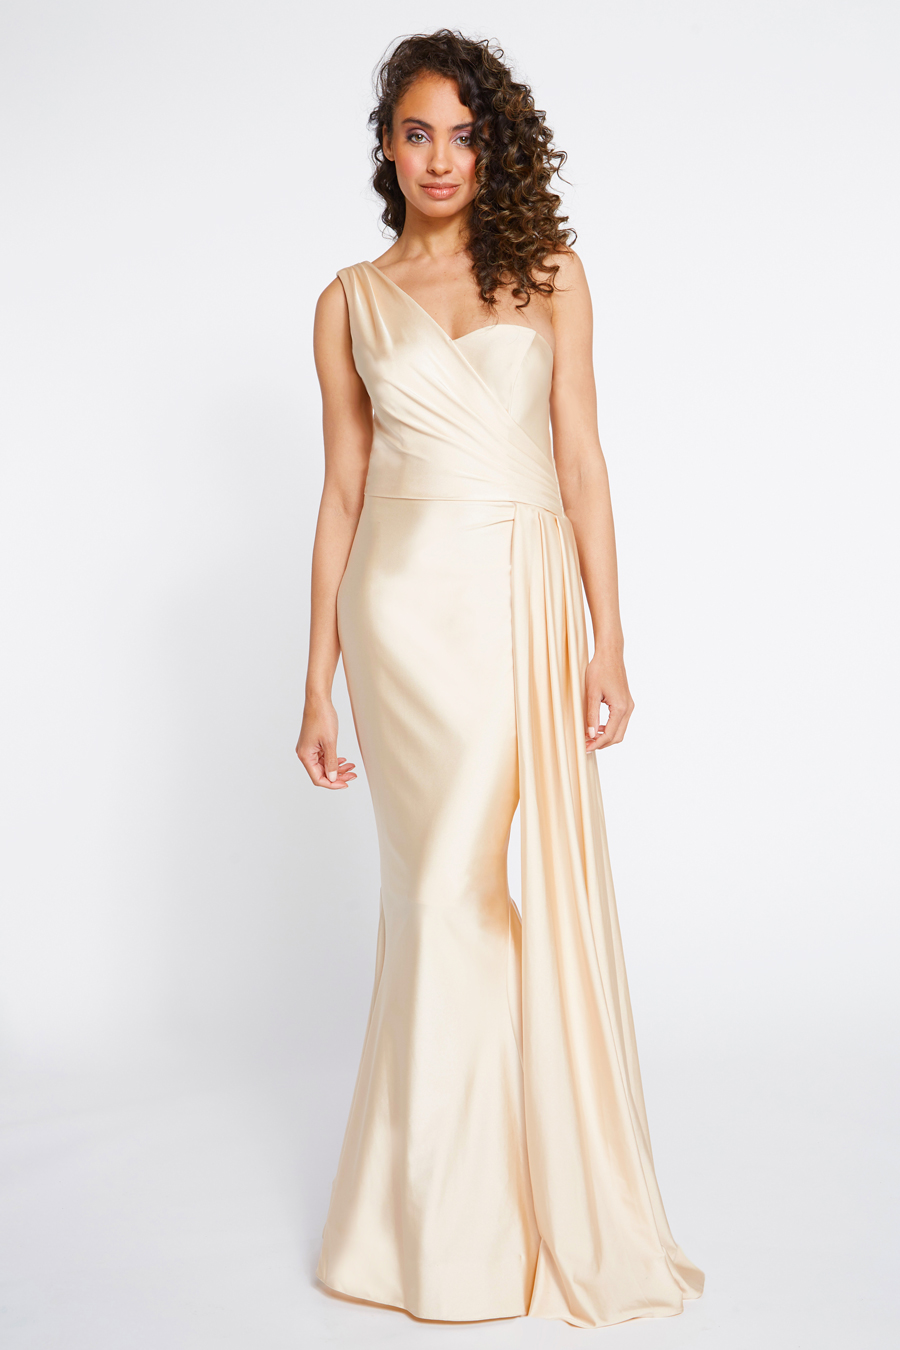 Front view of bridesmaid dress with one shoulder draped bodice